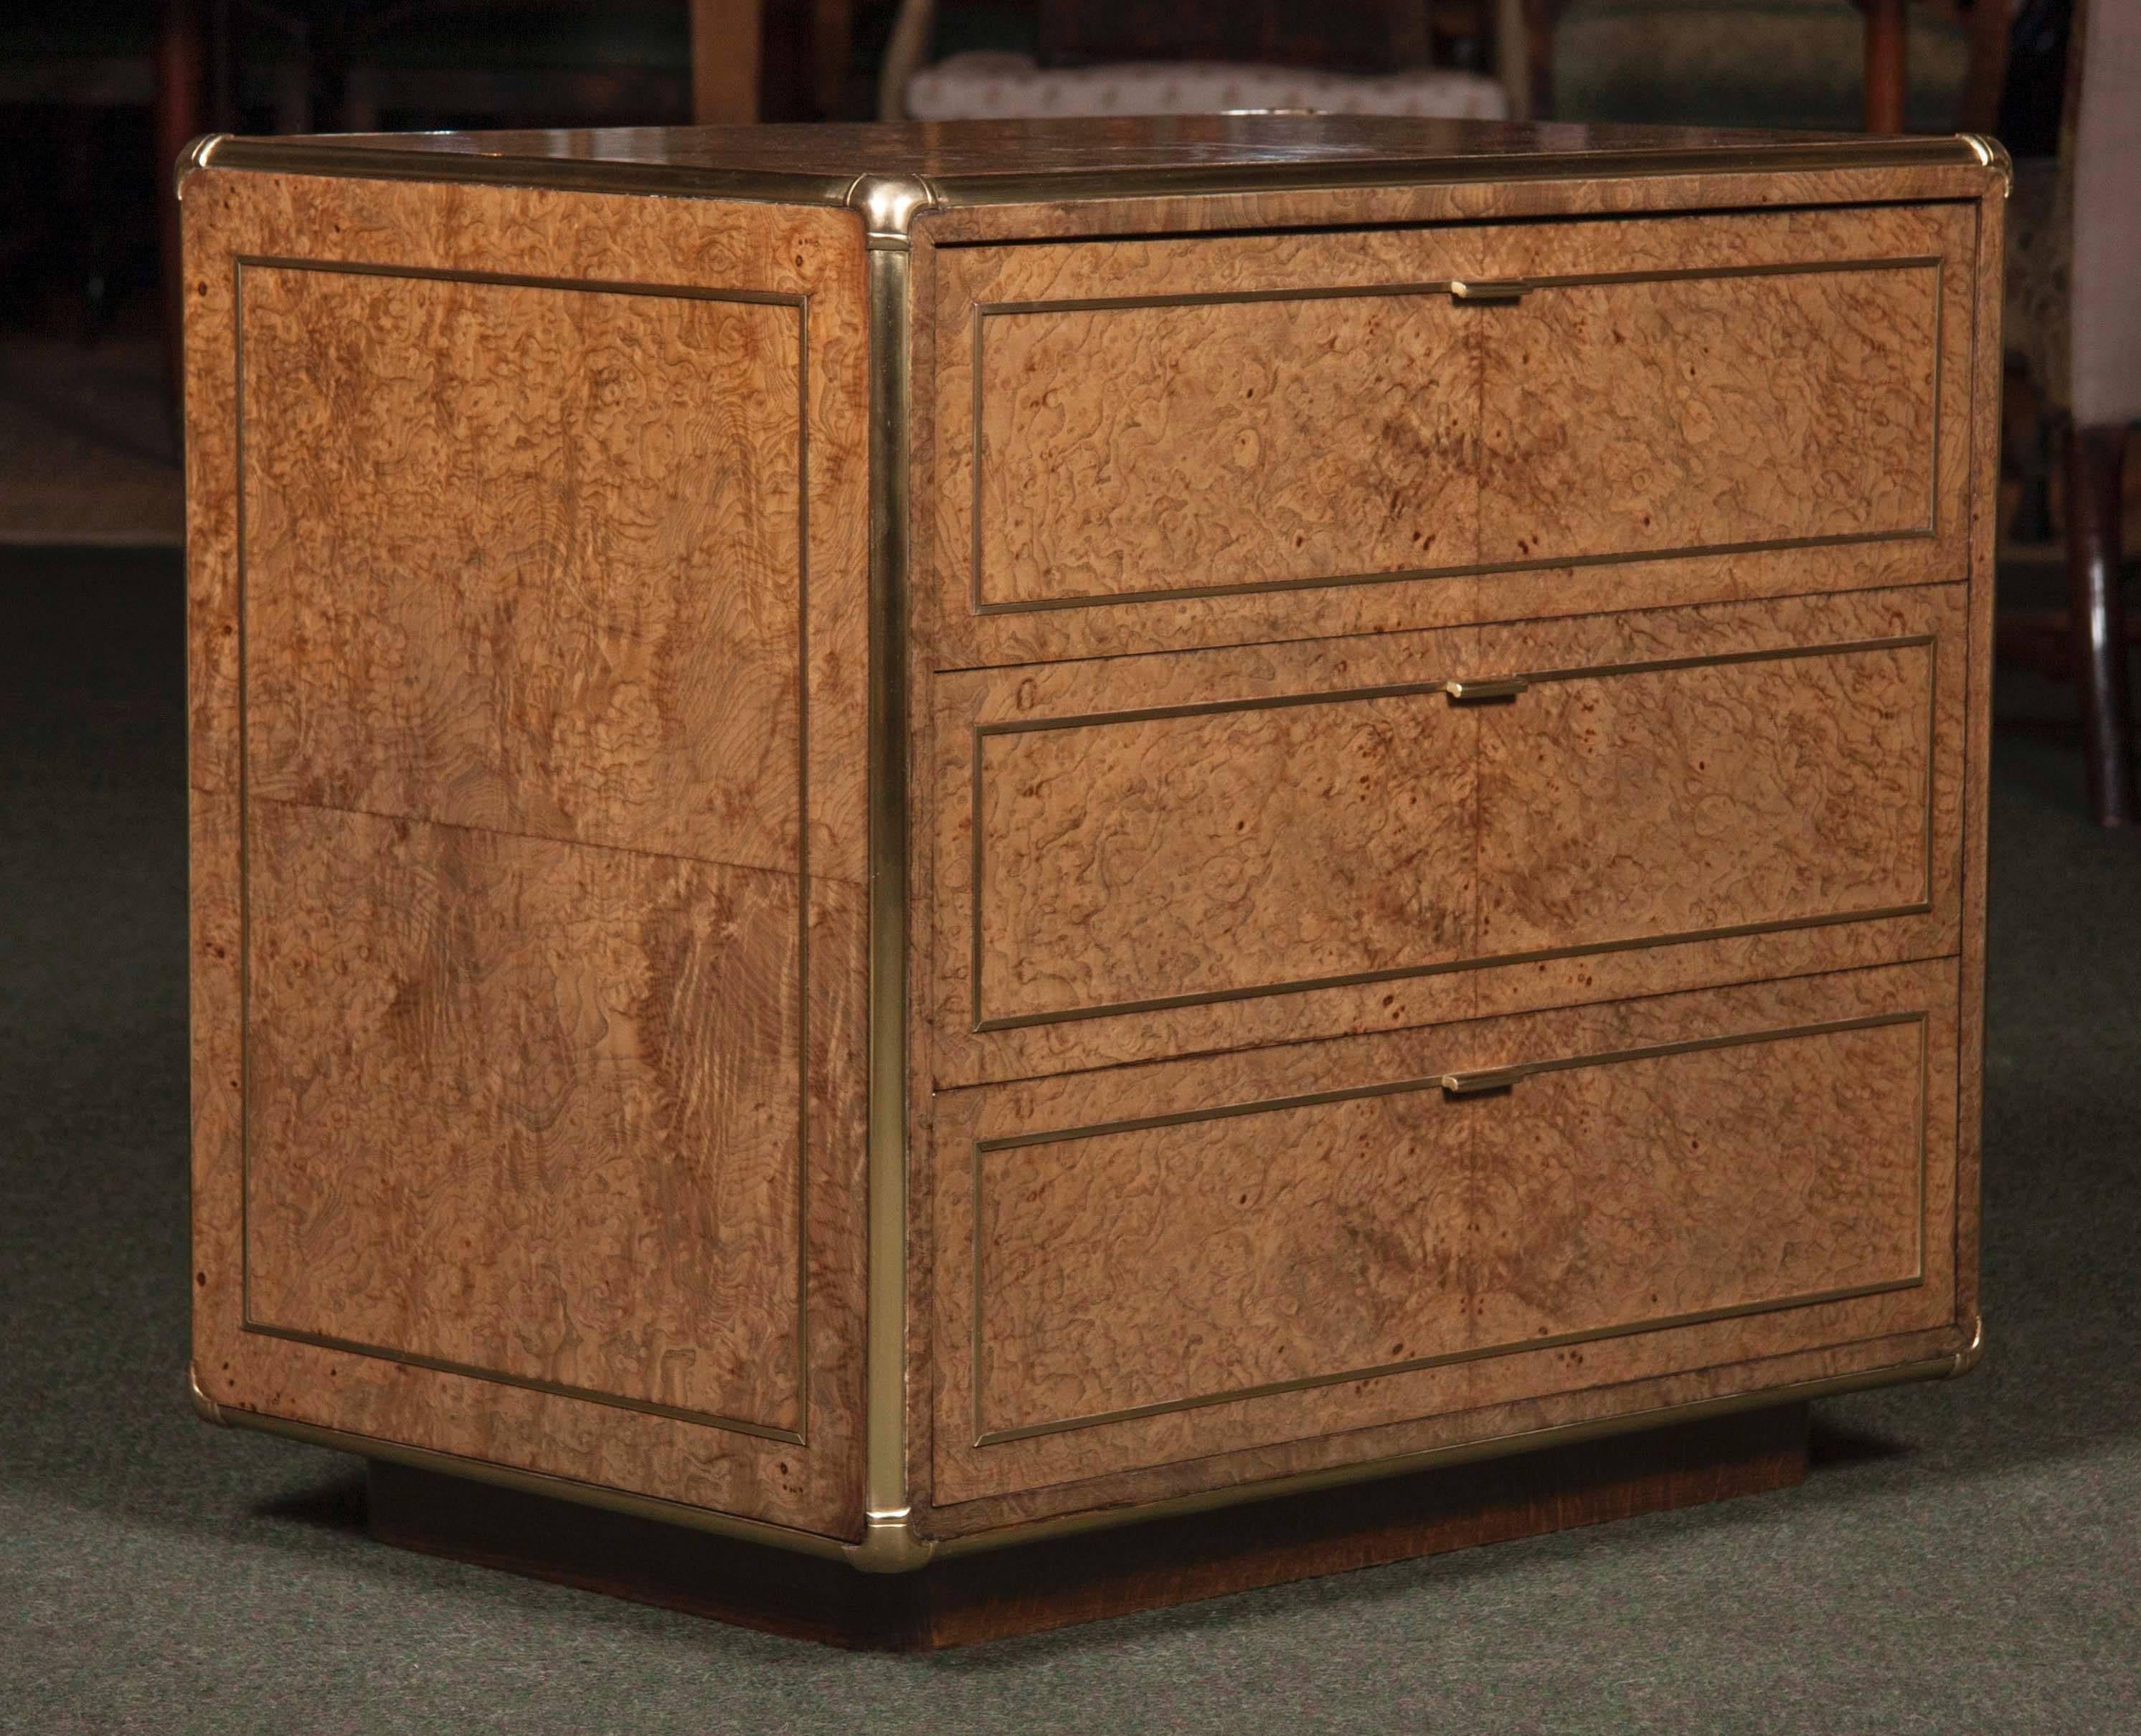 Pair of burl wood and brass-mounted Campaign style side cabinets. One with drawers and the other with doors and interior drawer. With brass edges and inlay.